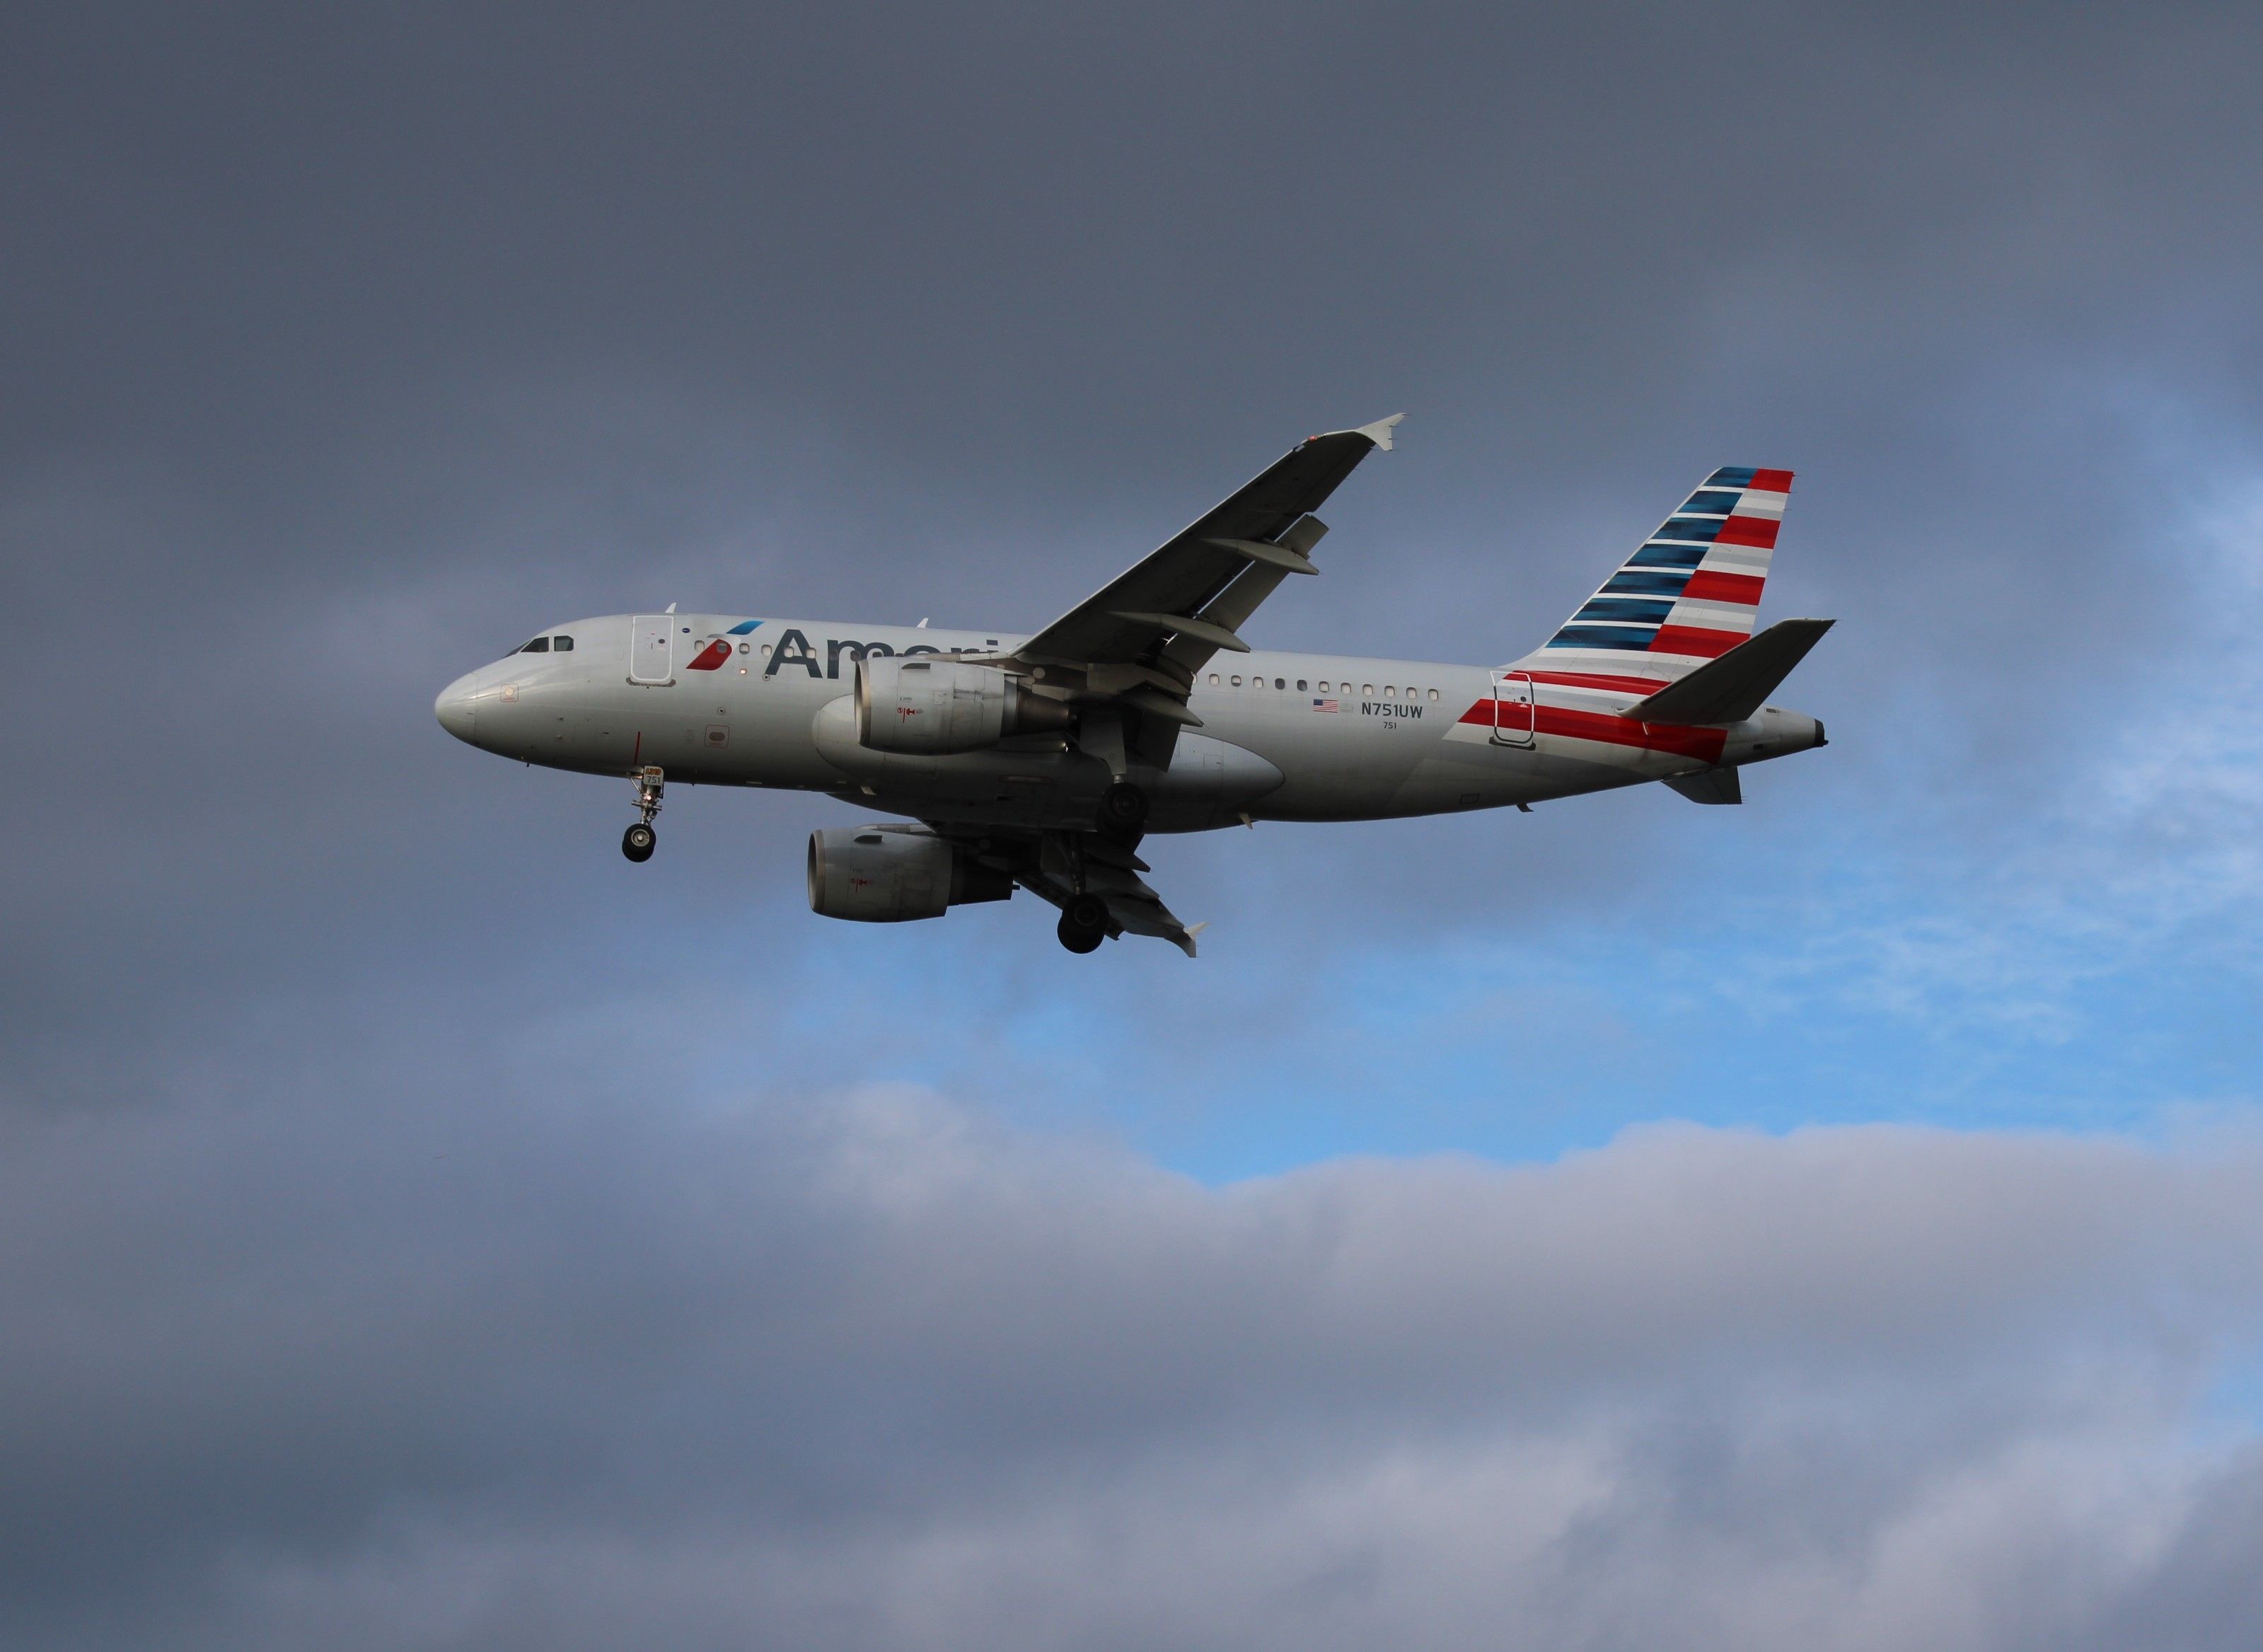 American Airlines Airbus A319 on approach at Boston Logan International Airport. 